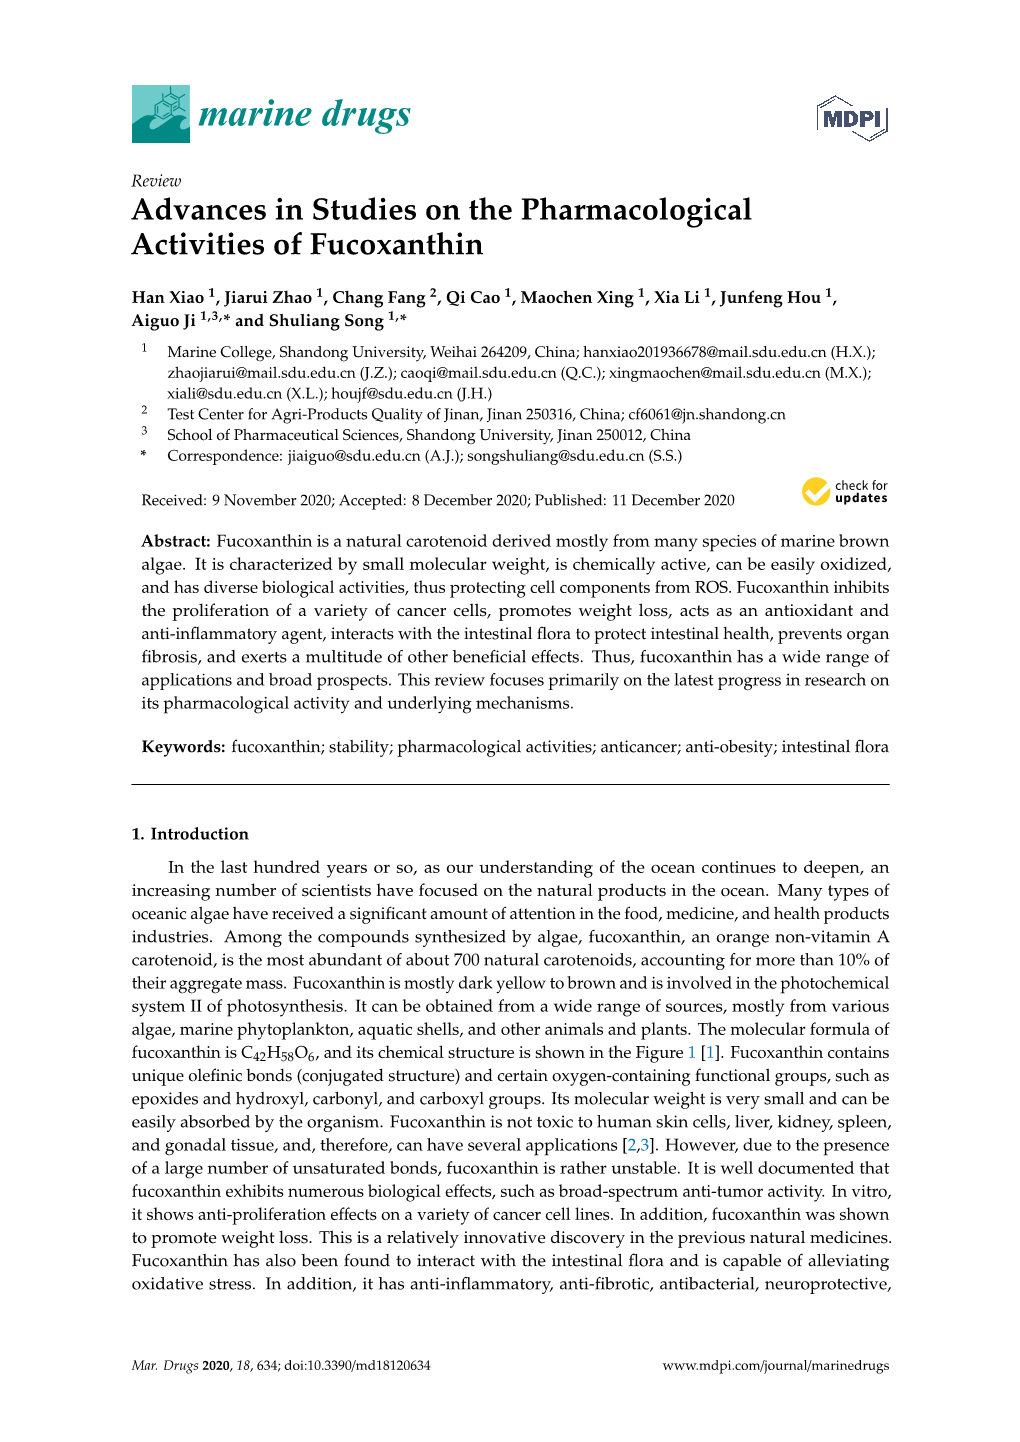 Advances in Studies on the Pharmacological Activities of Fucoxanthin